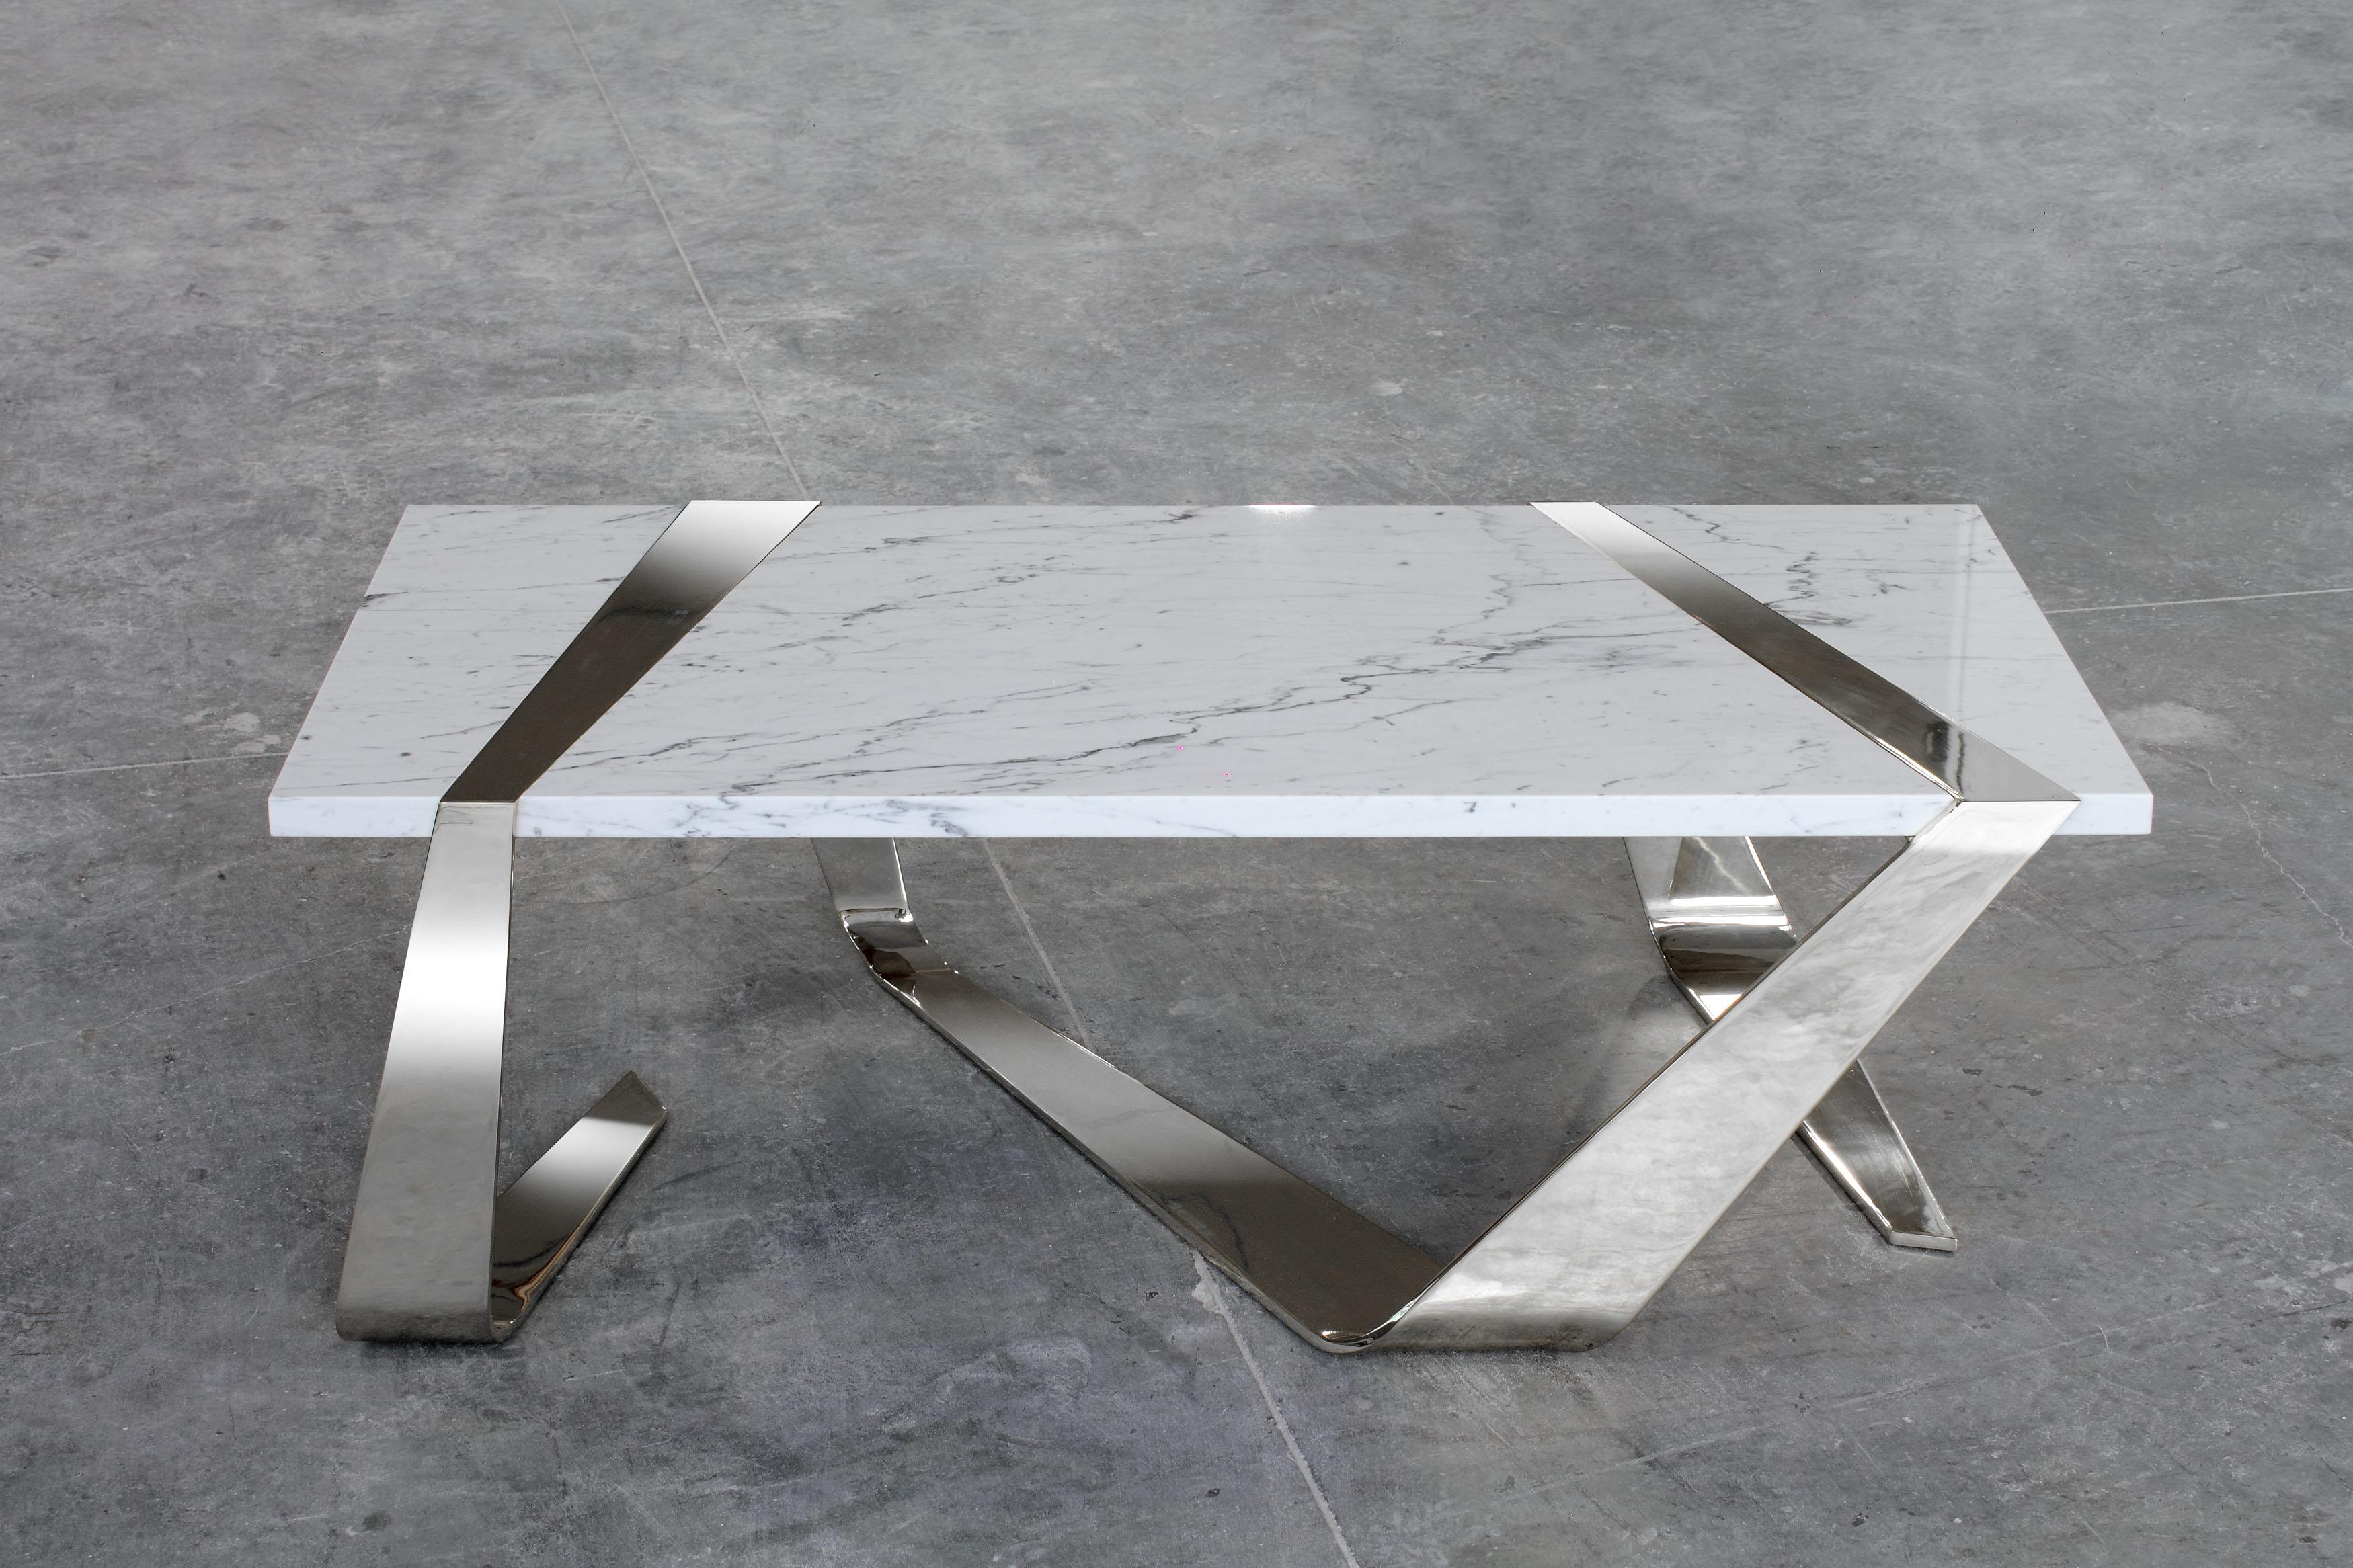 The 'Già-cinto' coffee table is characterized by a mirror-polished stainless steel structure which, like a ribbon, wraps and supports a precious slab of Carrara white marble which serves as a table top. The stainless steel structure is welded and